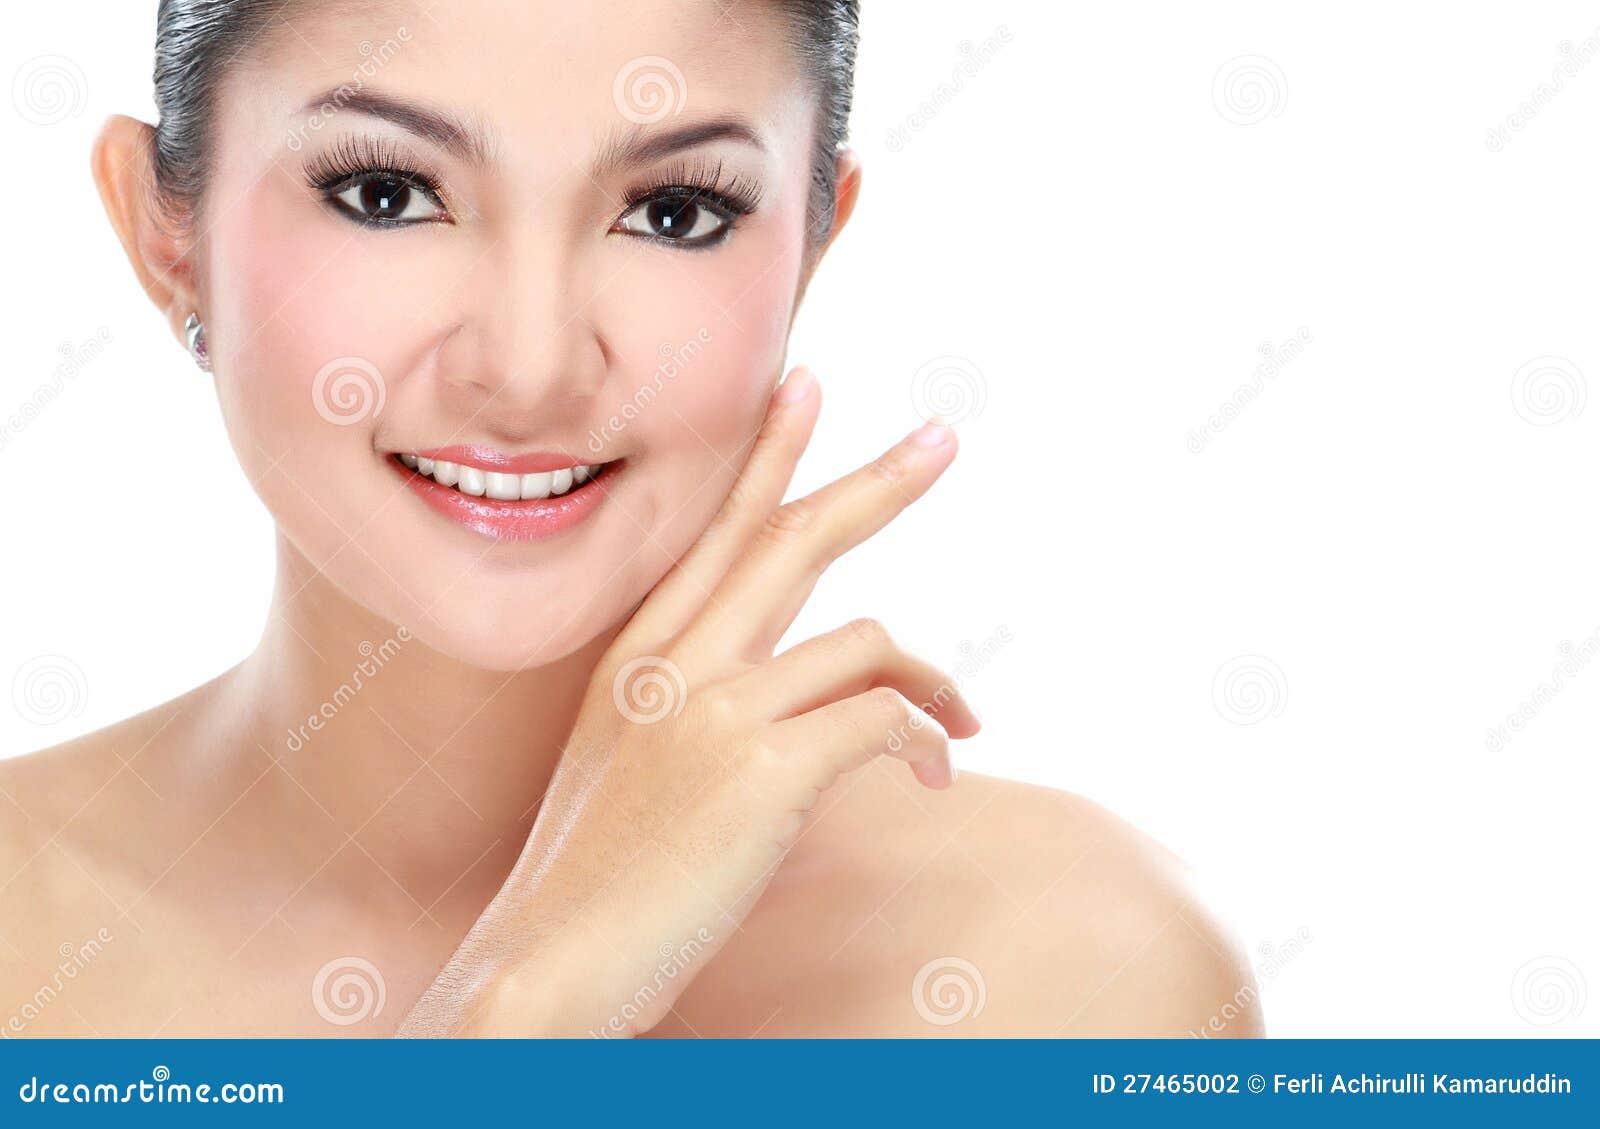 Cosmetics For Asian Women With 88